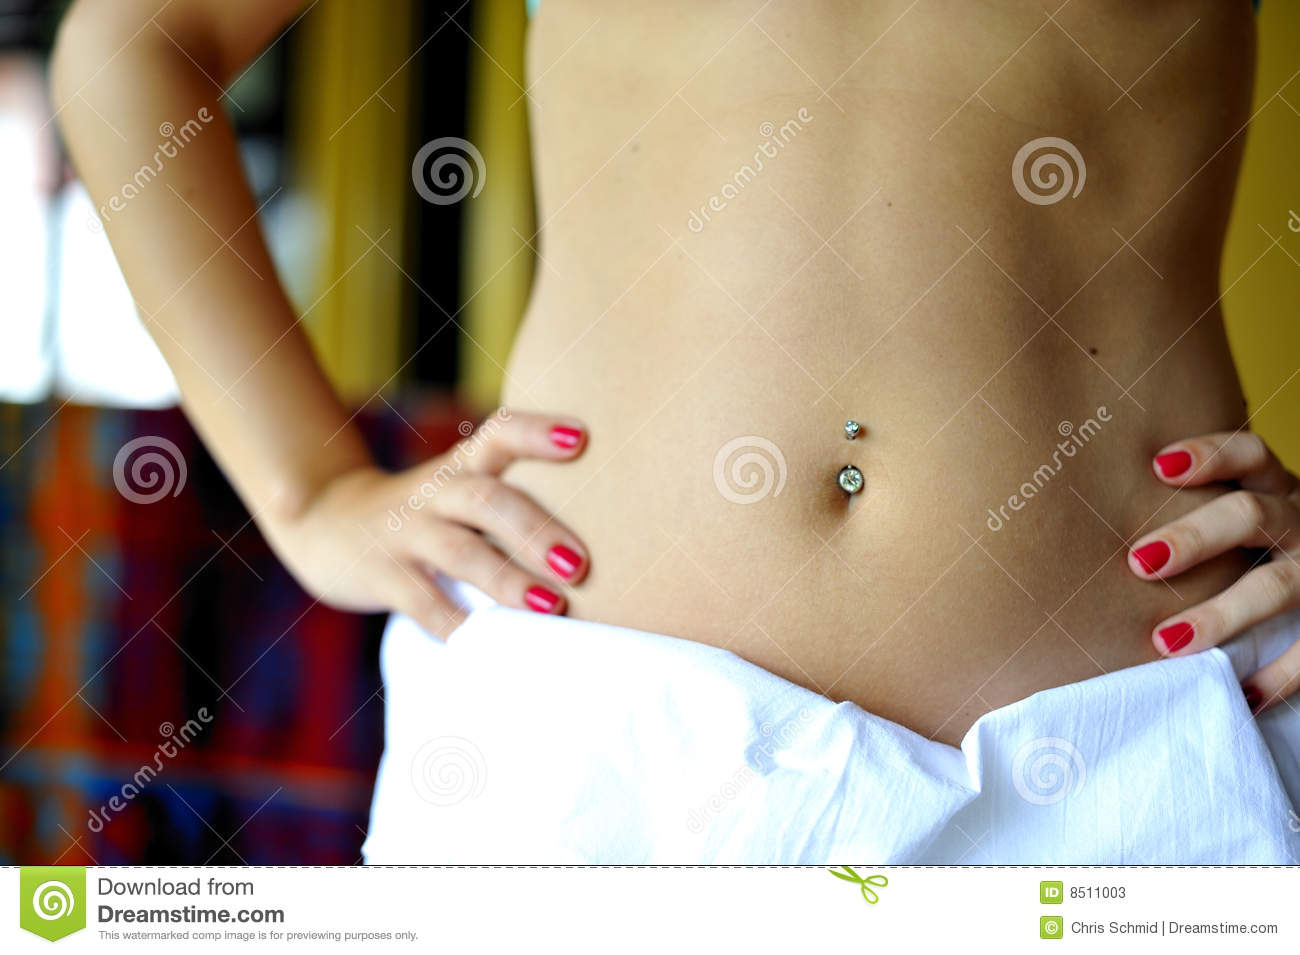 Woman Showing Her Tummy With Red Nailes